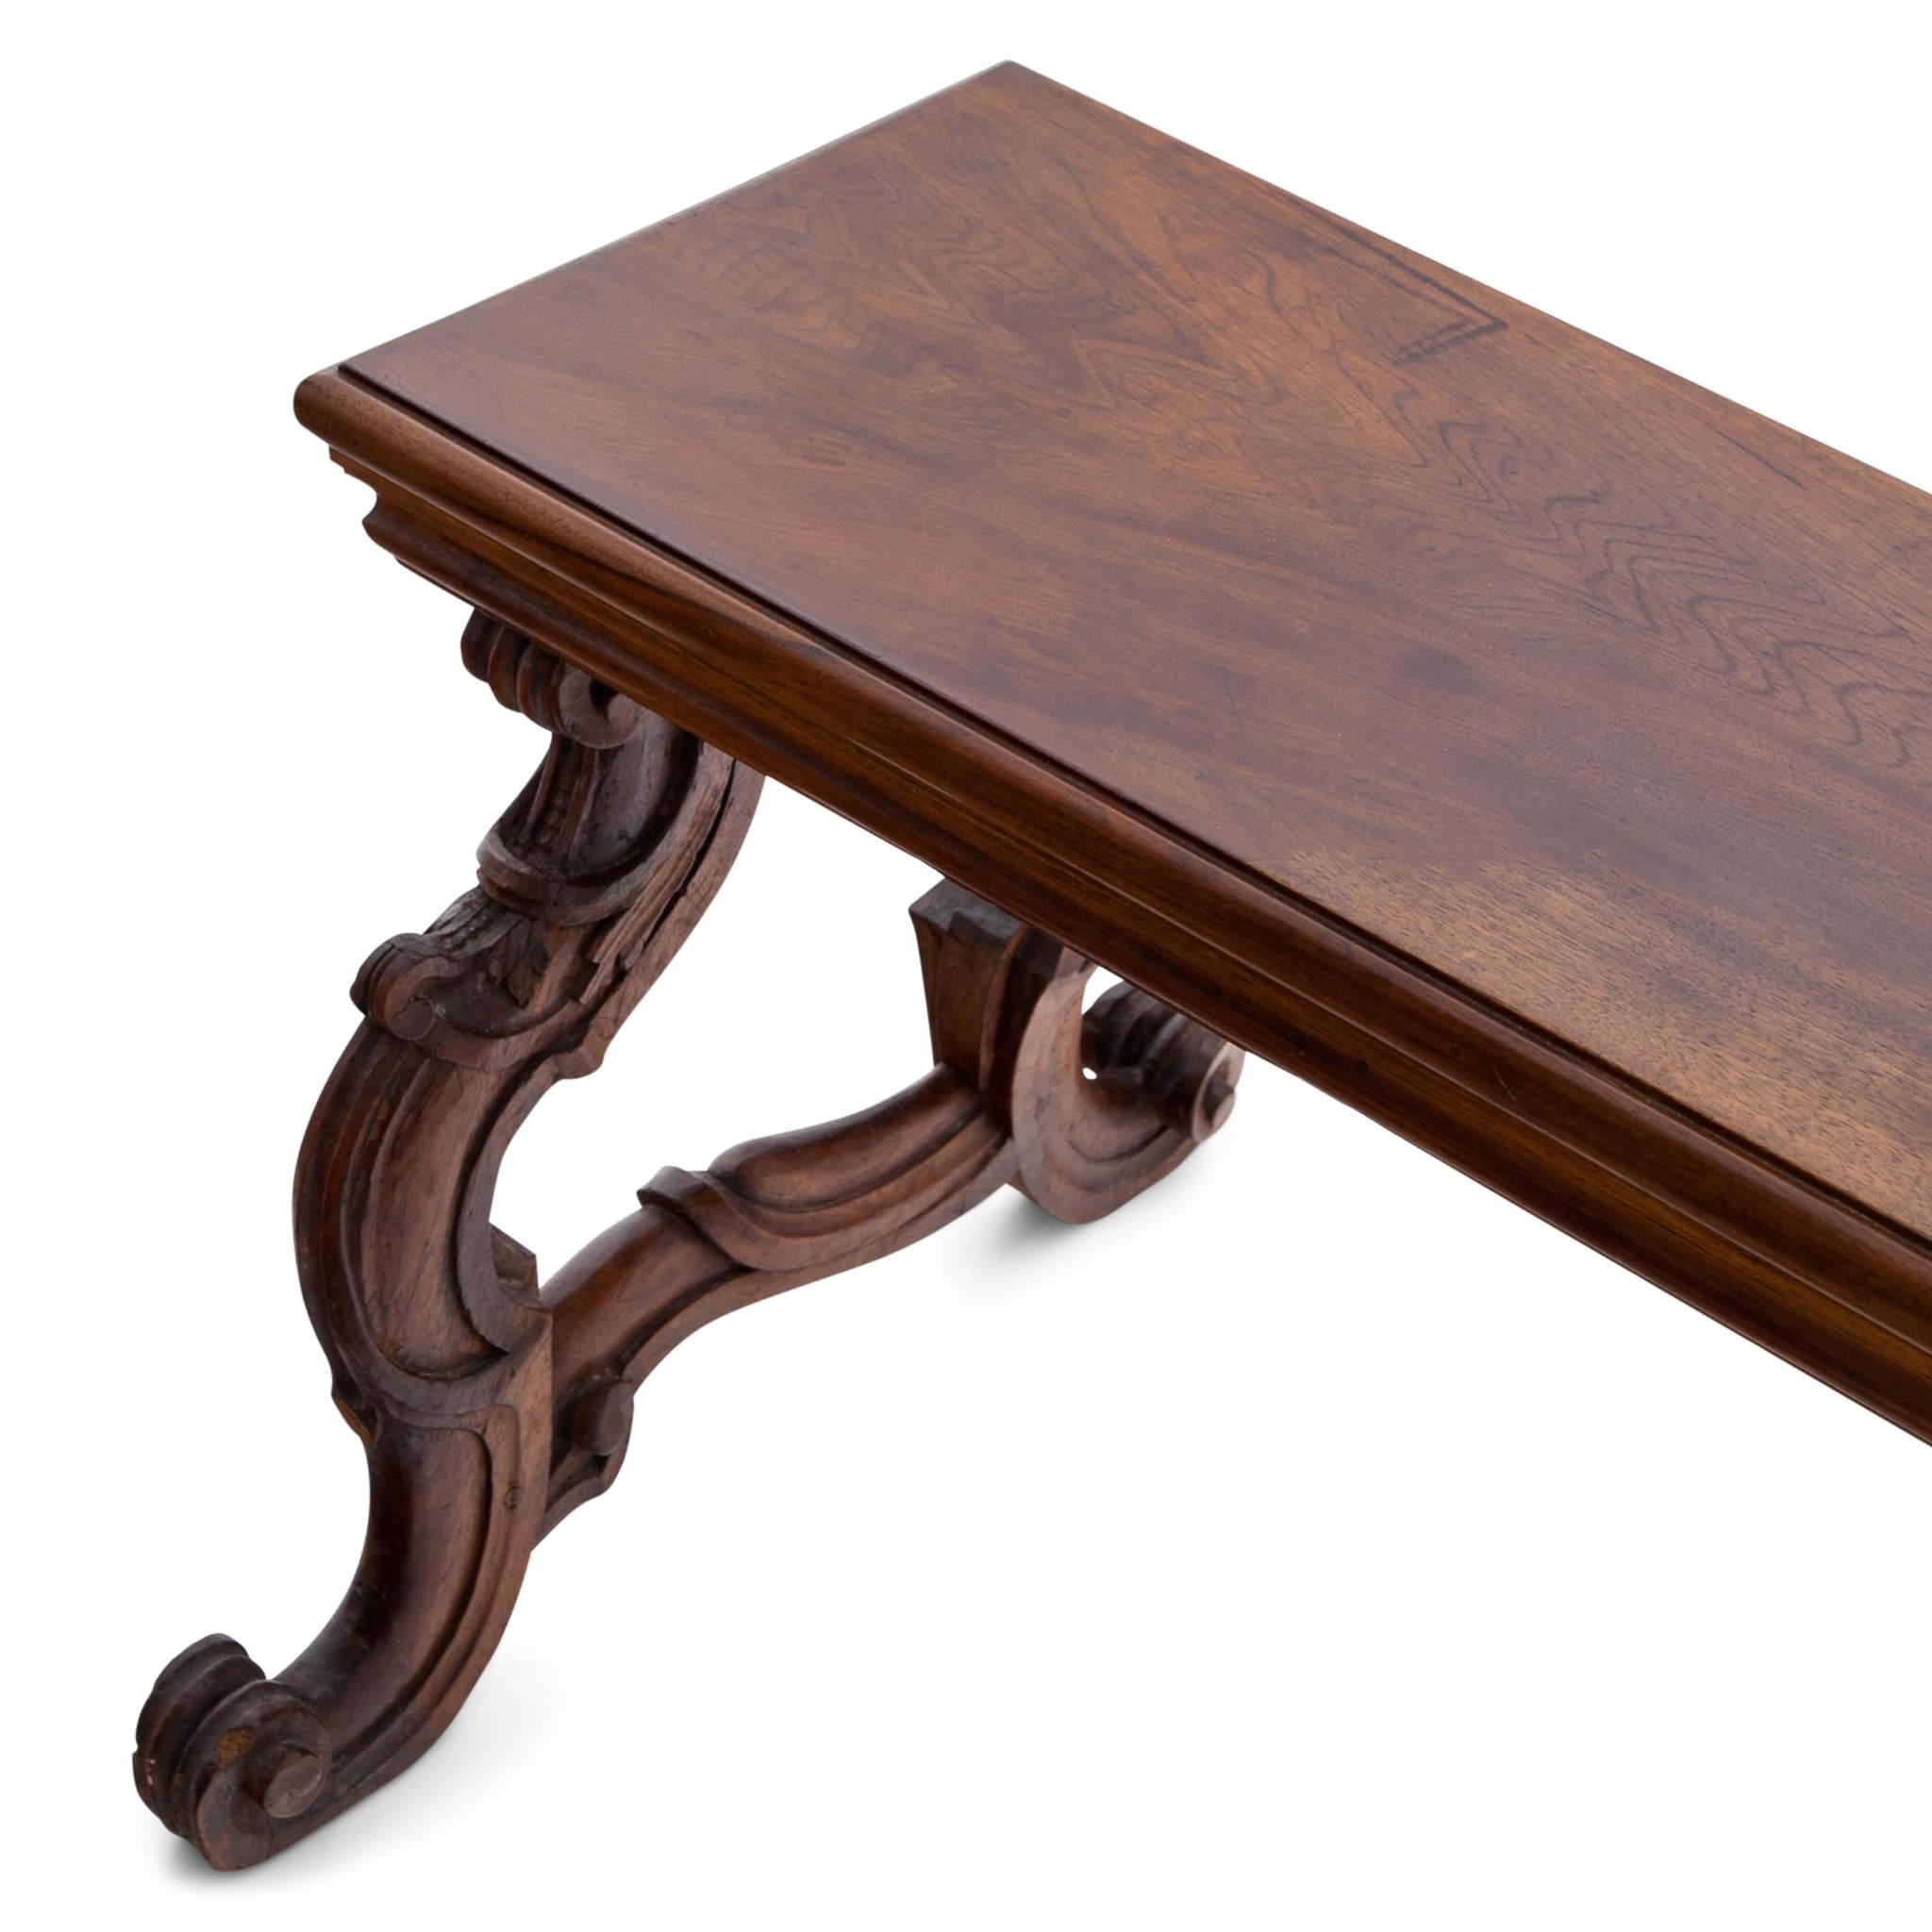 Baroque walnut bench with a rectangular seat and protruding volute legs.